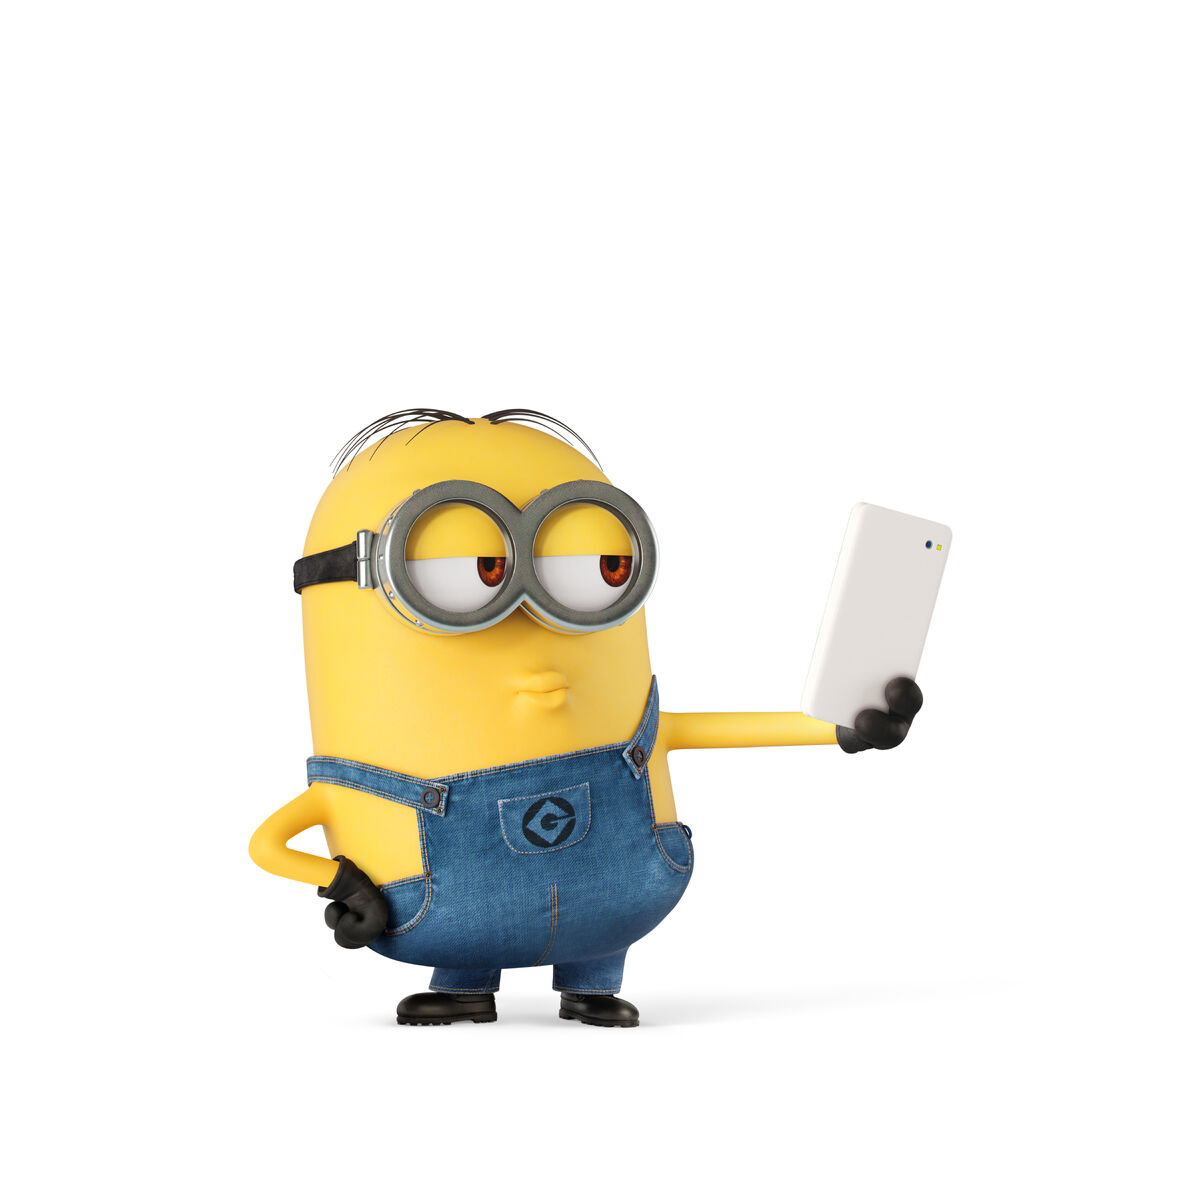 Stickers Minions (Despicable Me) - Illustrated Minion | Tips for original  gifts